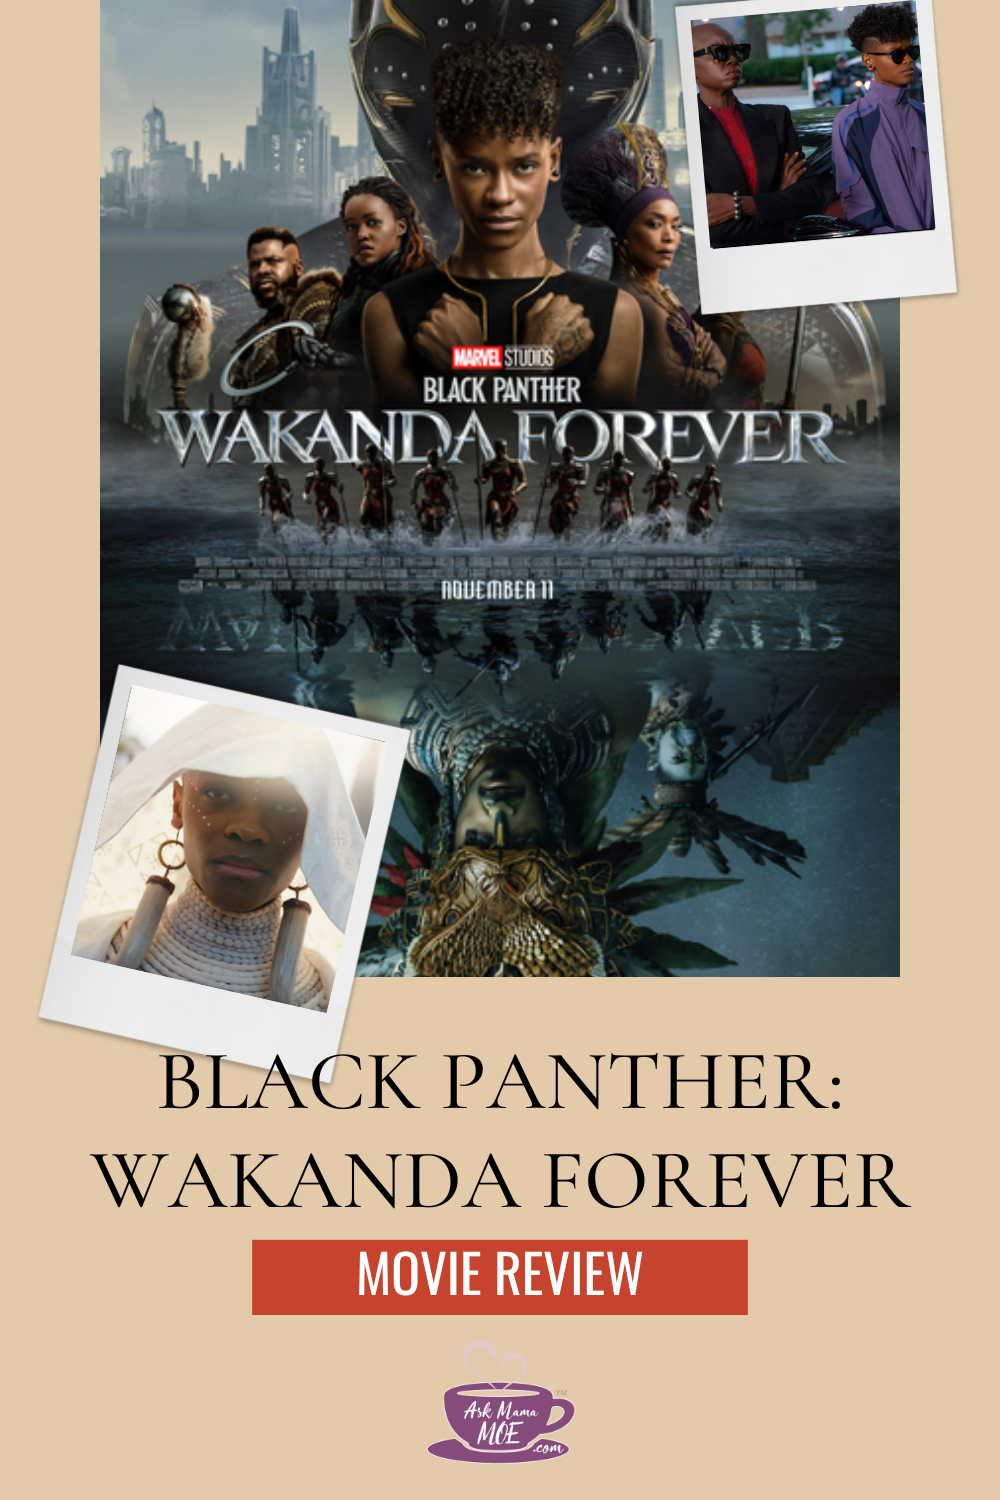 Dive into the newest Marvel movie with our Black Panther: Wakanda Forever movie review. Hint: we loved it!